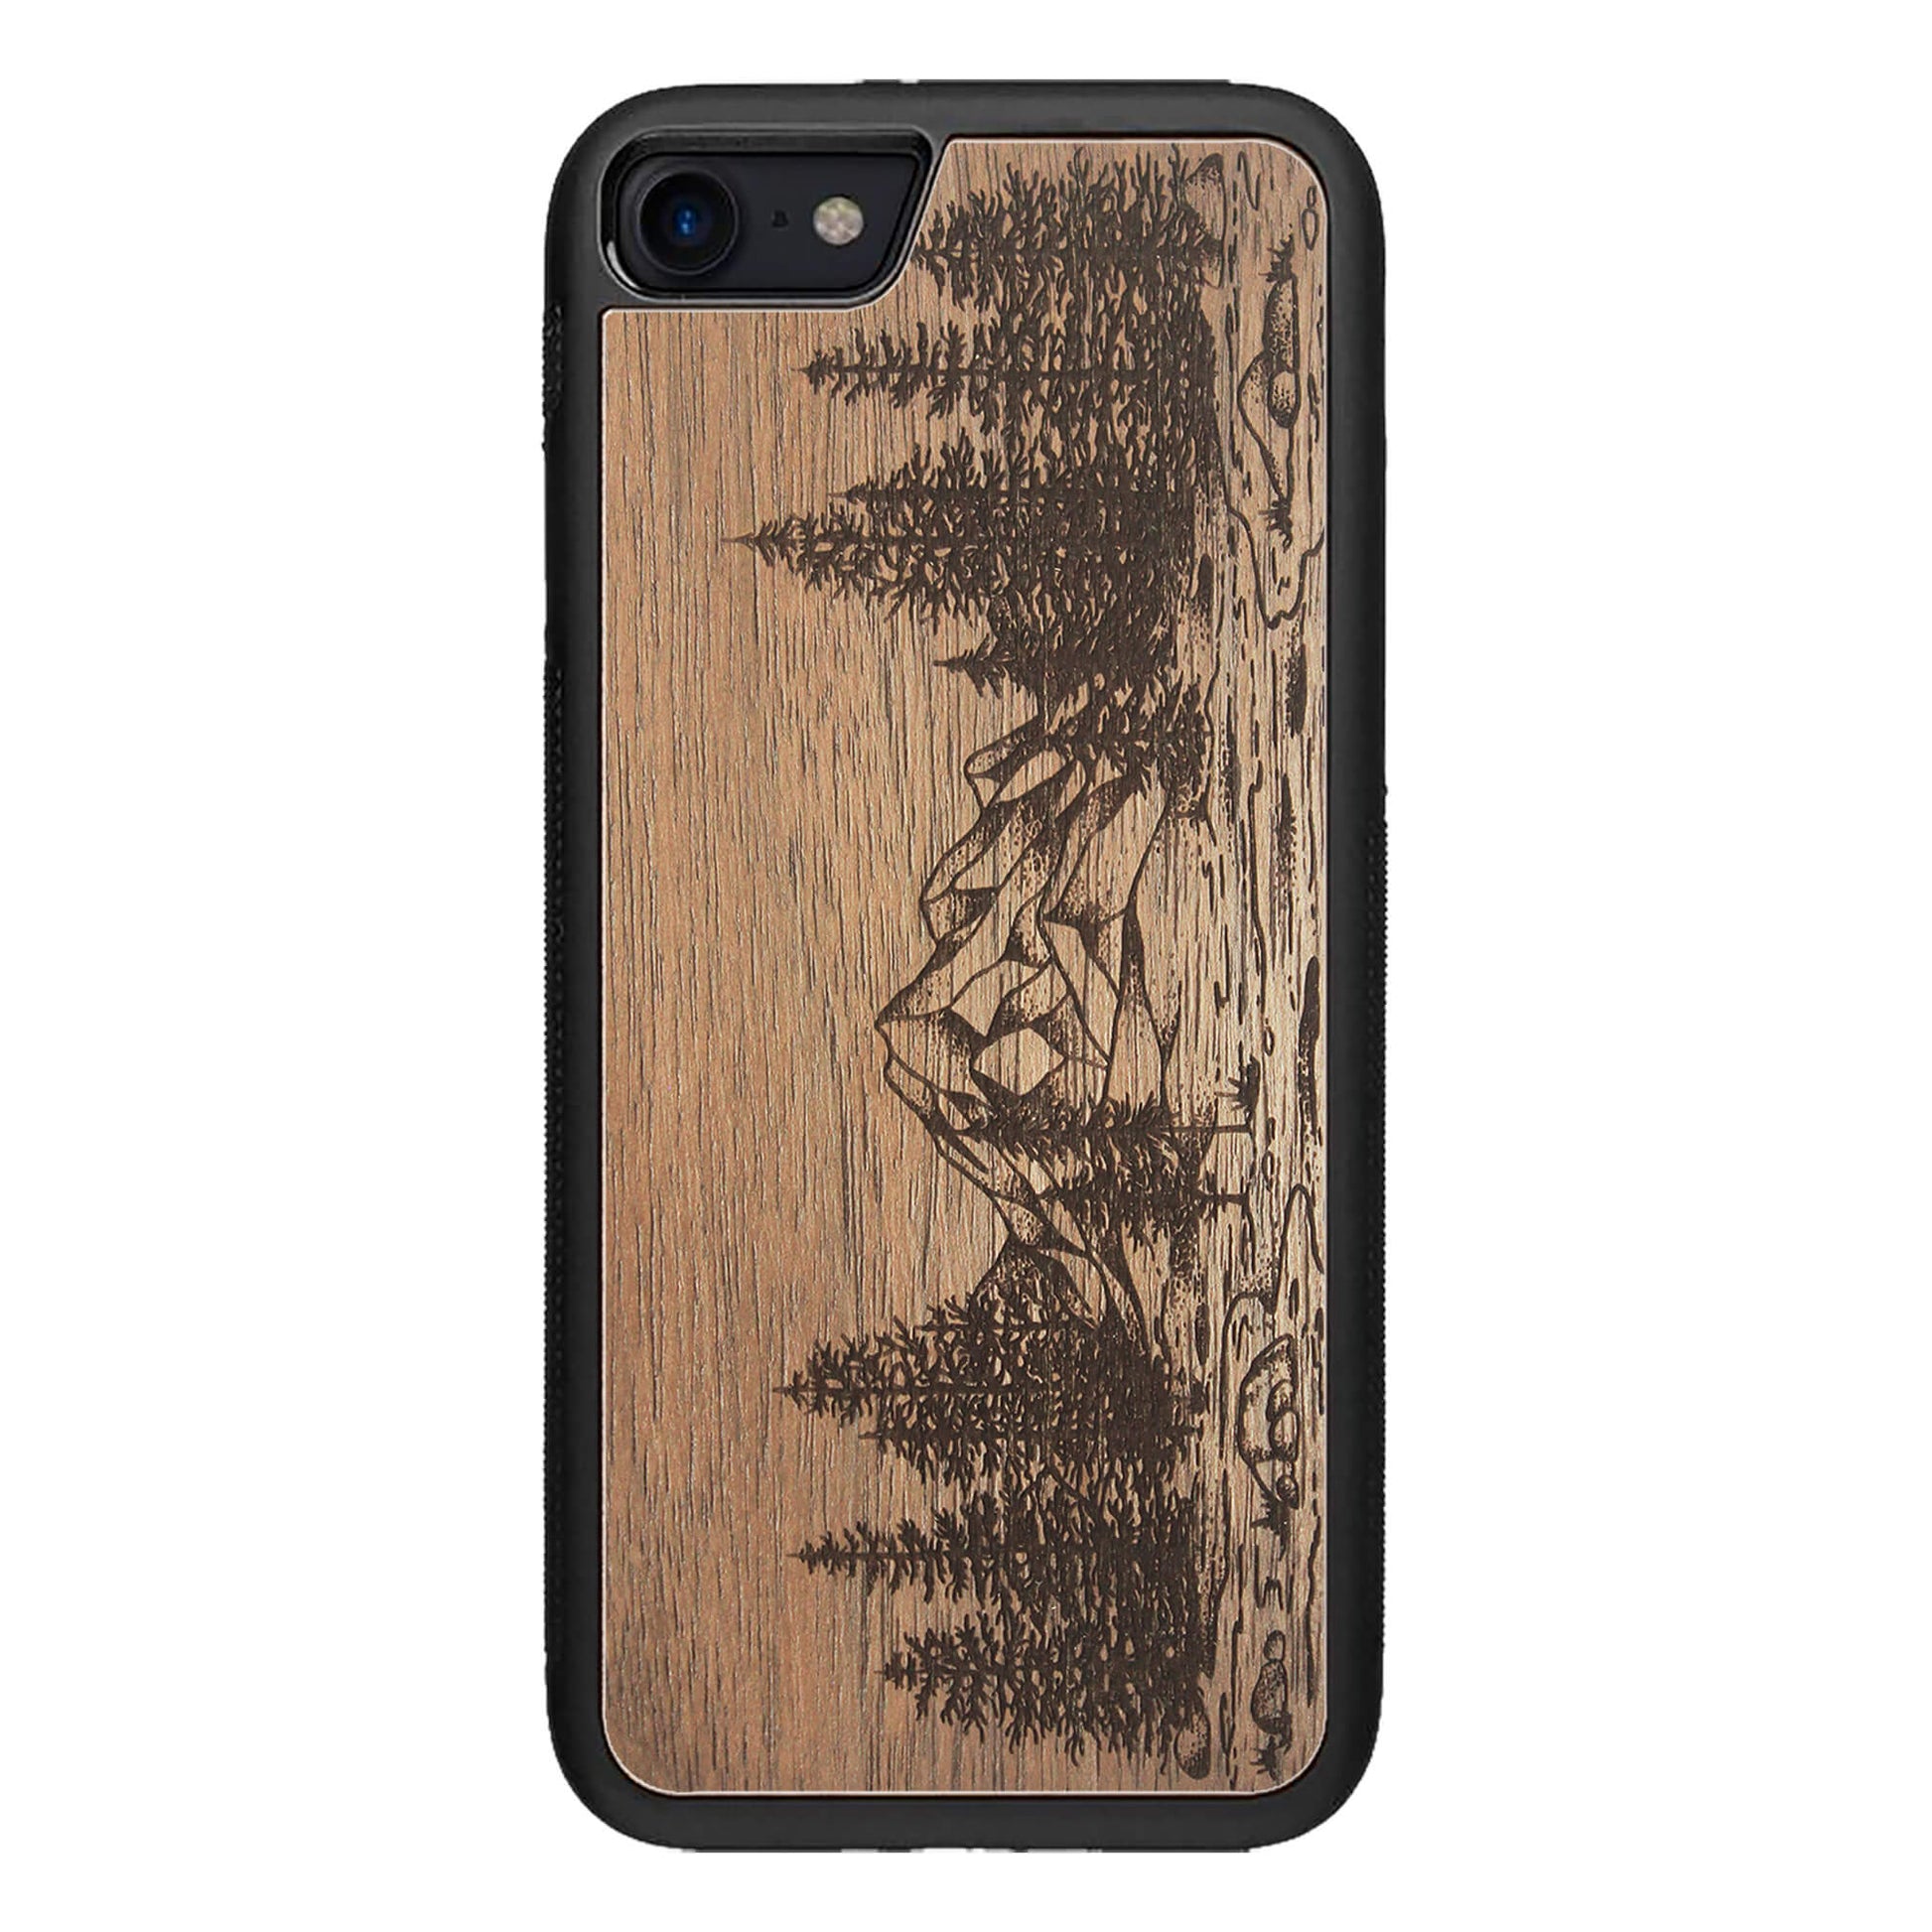 Wooden Case for iPhone SE 2 generation case Nature